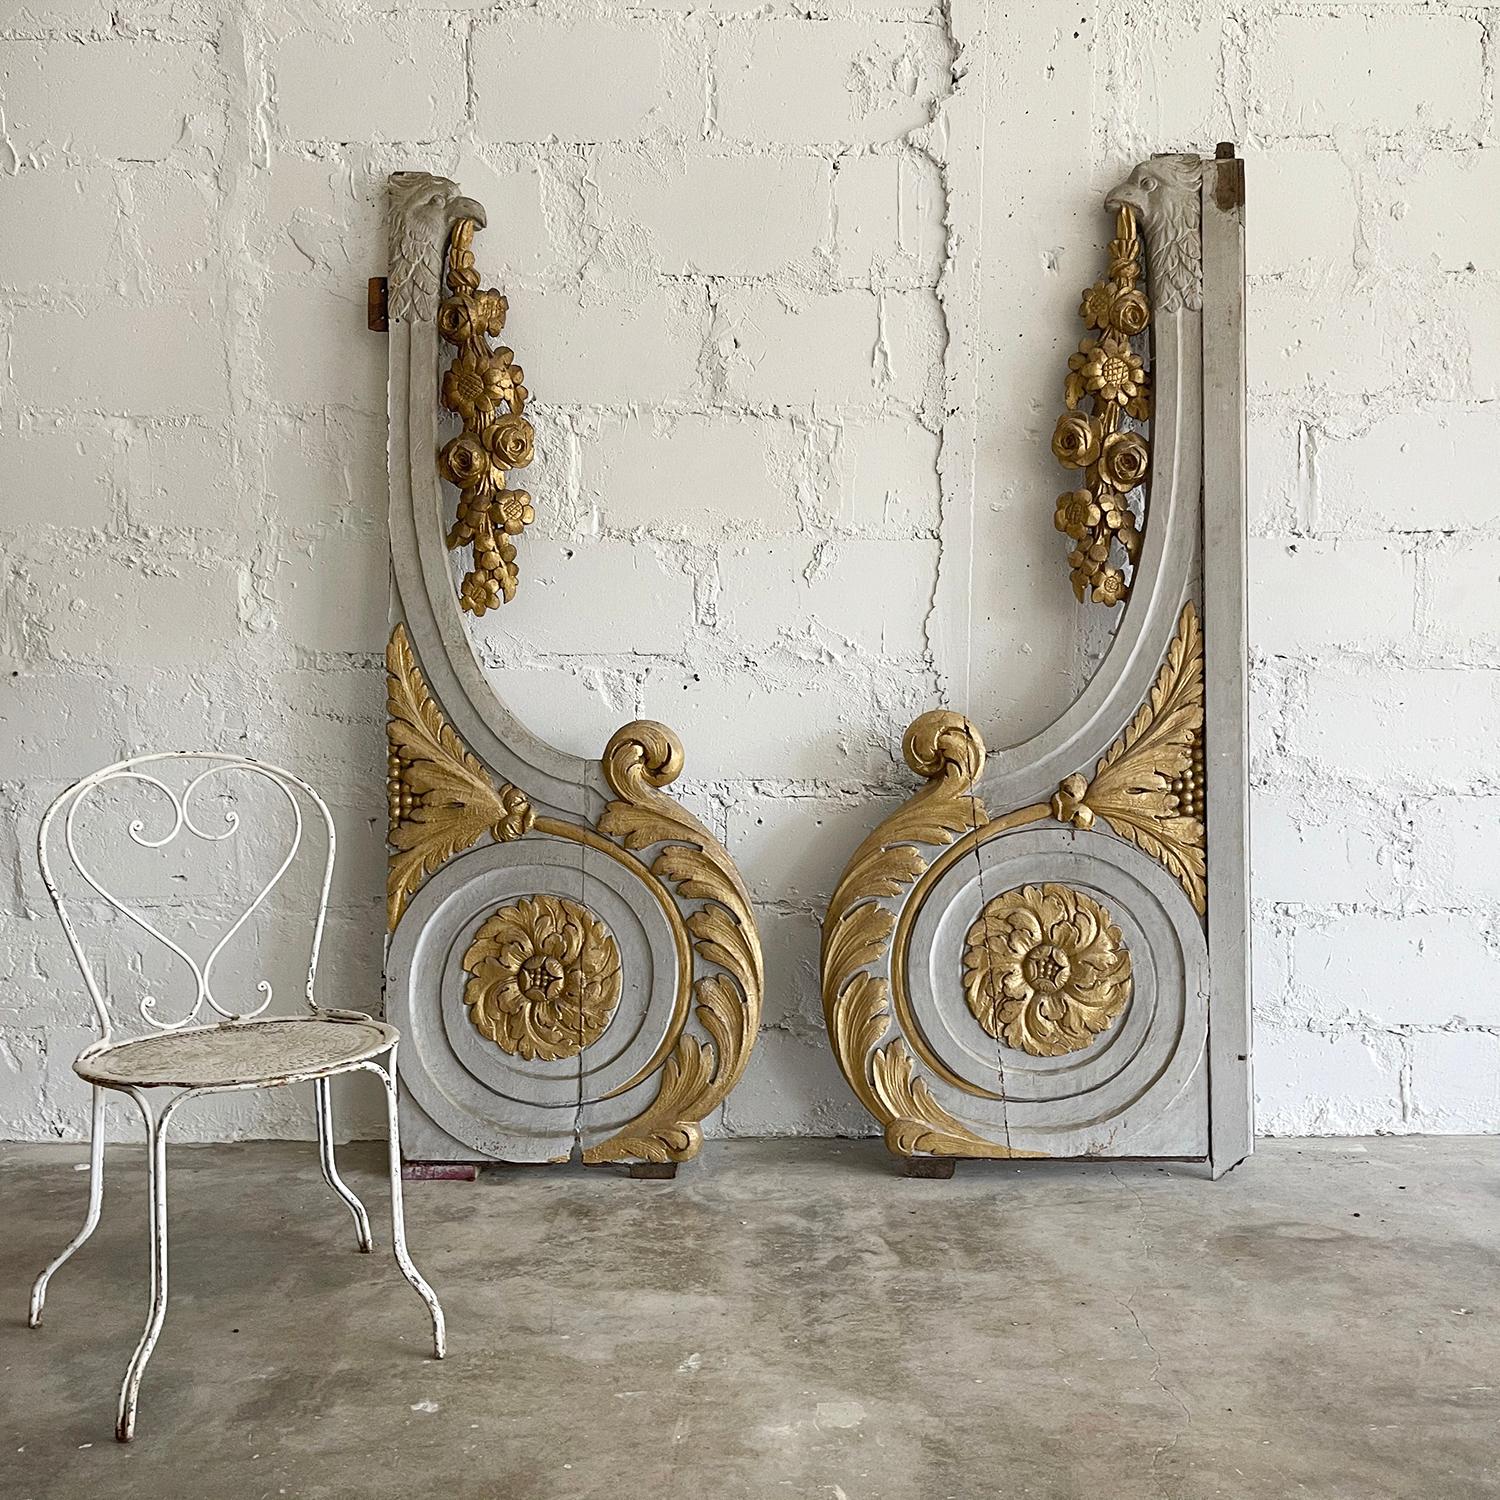 An antique pair of French Baroque painted and partial, gilt carved architectural elements or wall panels, in good condition. These ornaments are very ornate and decorated with large rosettes, fruit garlands and scrolls. One fragment is larger than